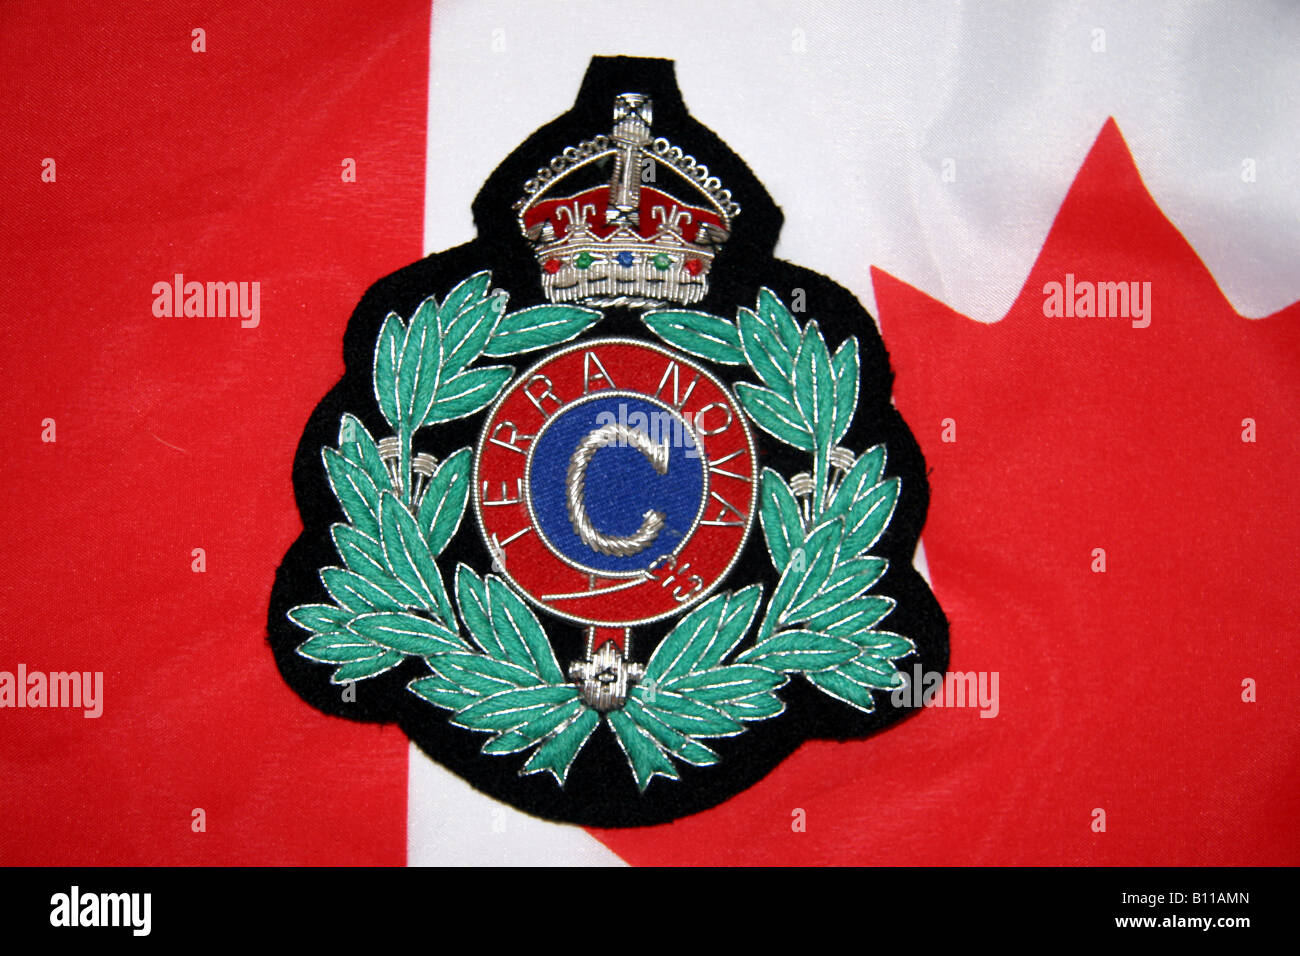 Canadian flag and Police badge Stock Photo